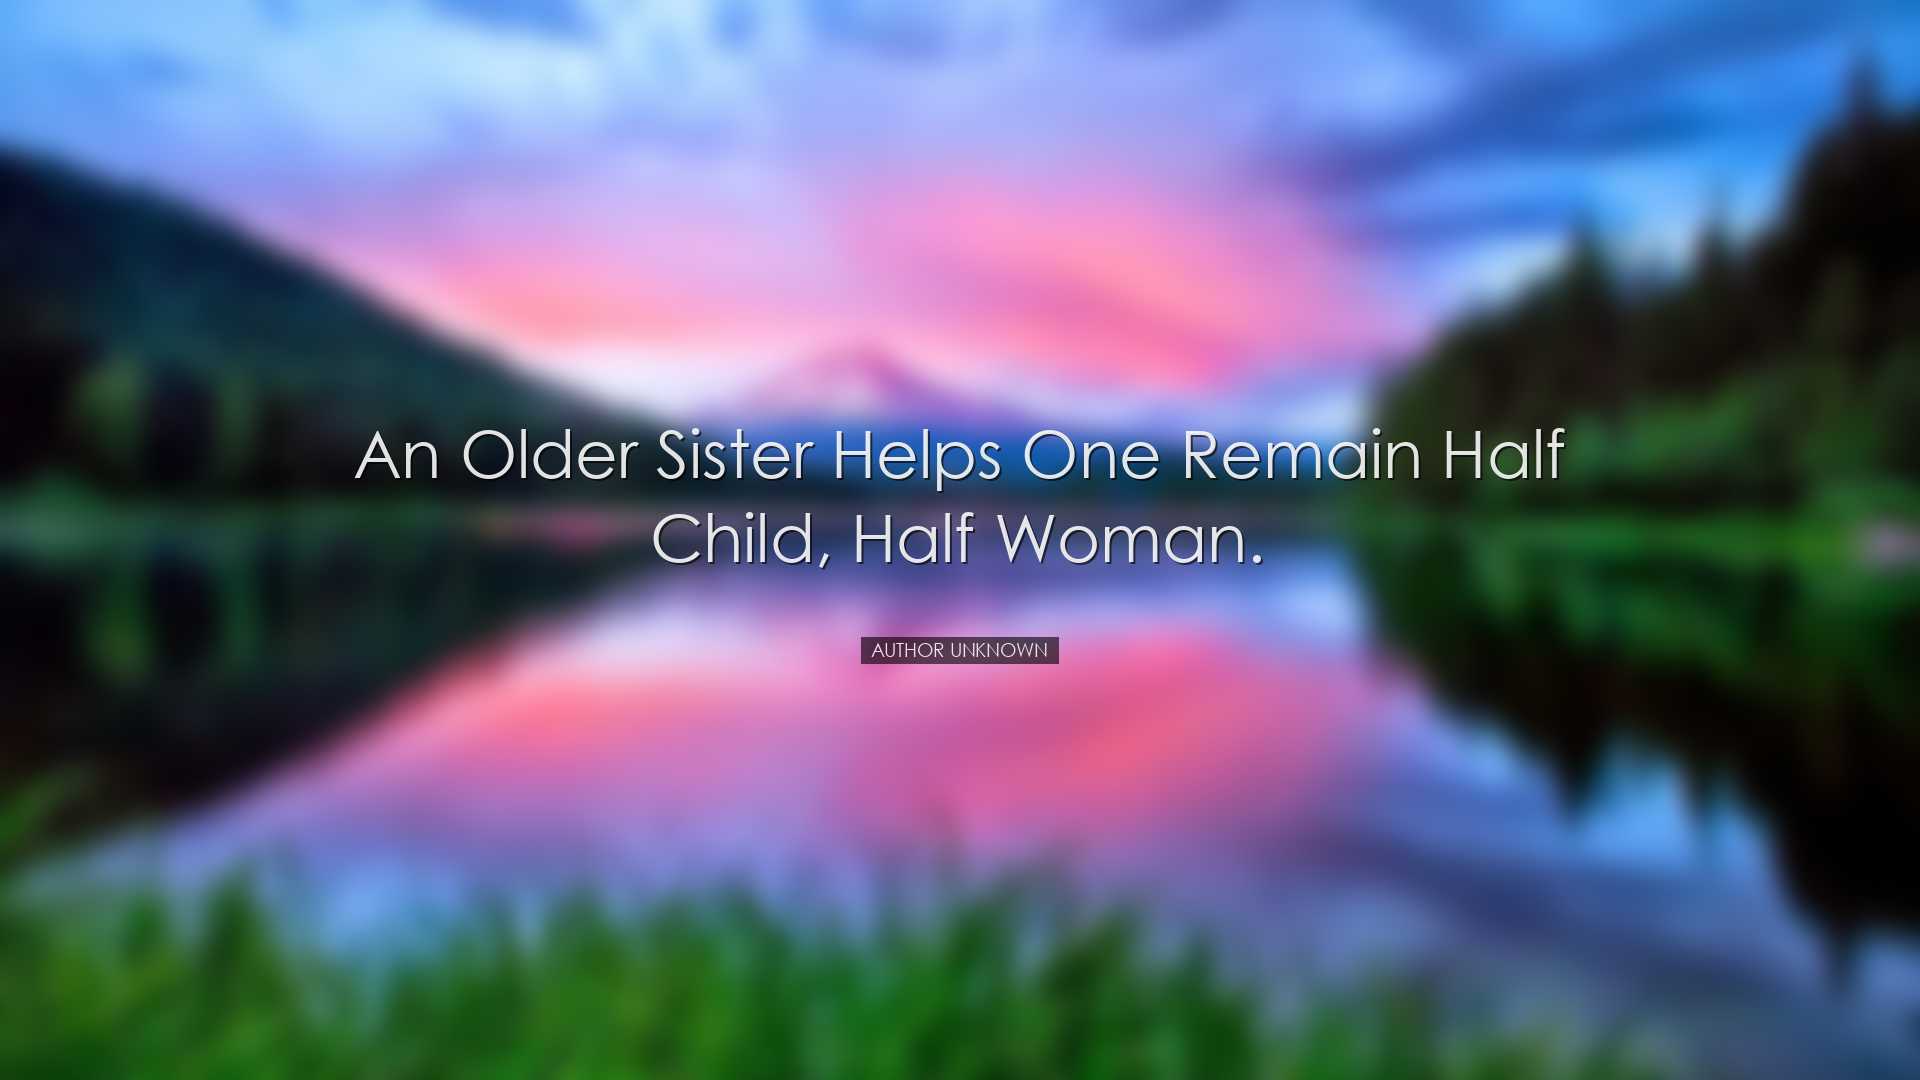 An older sister helps one remain half child, half woman. - Author